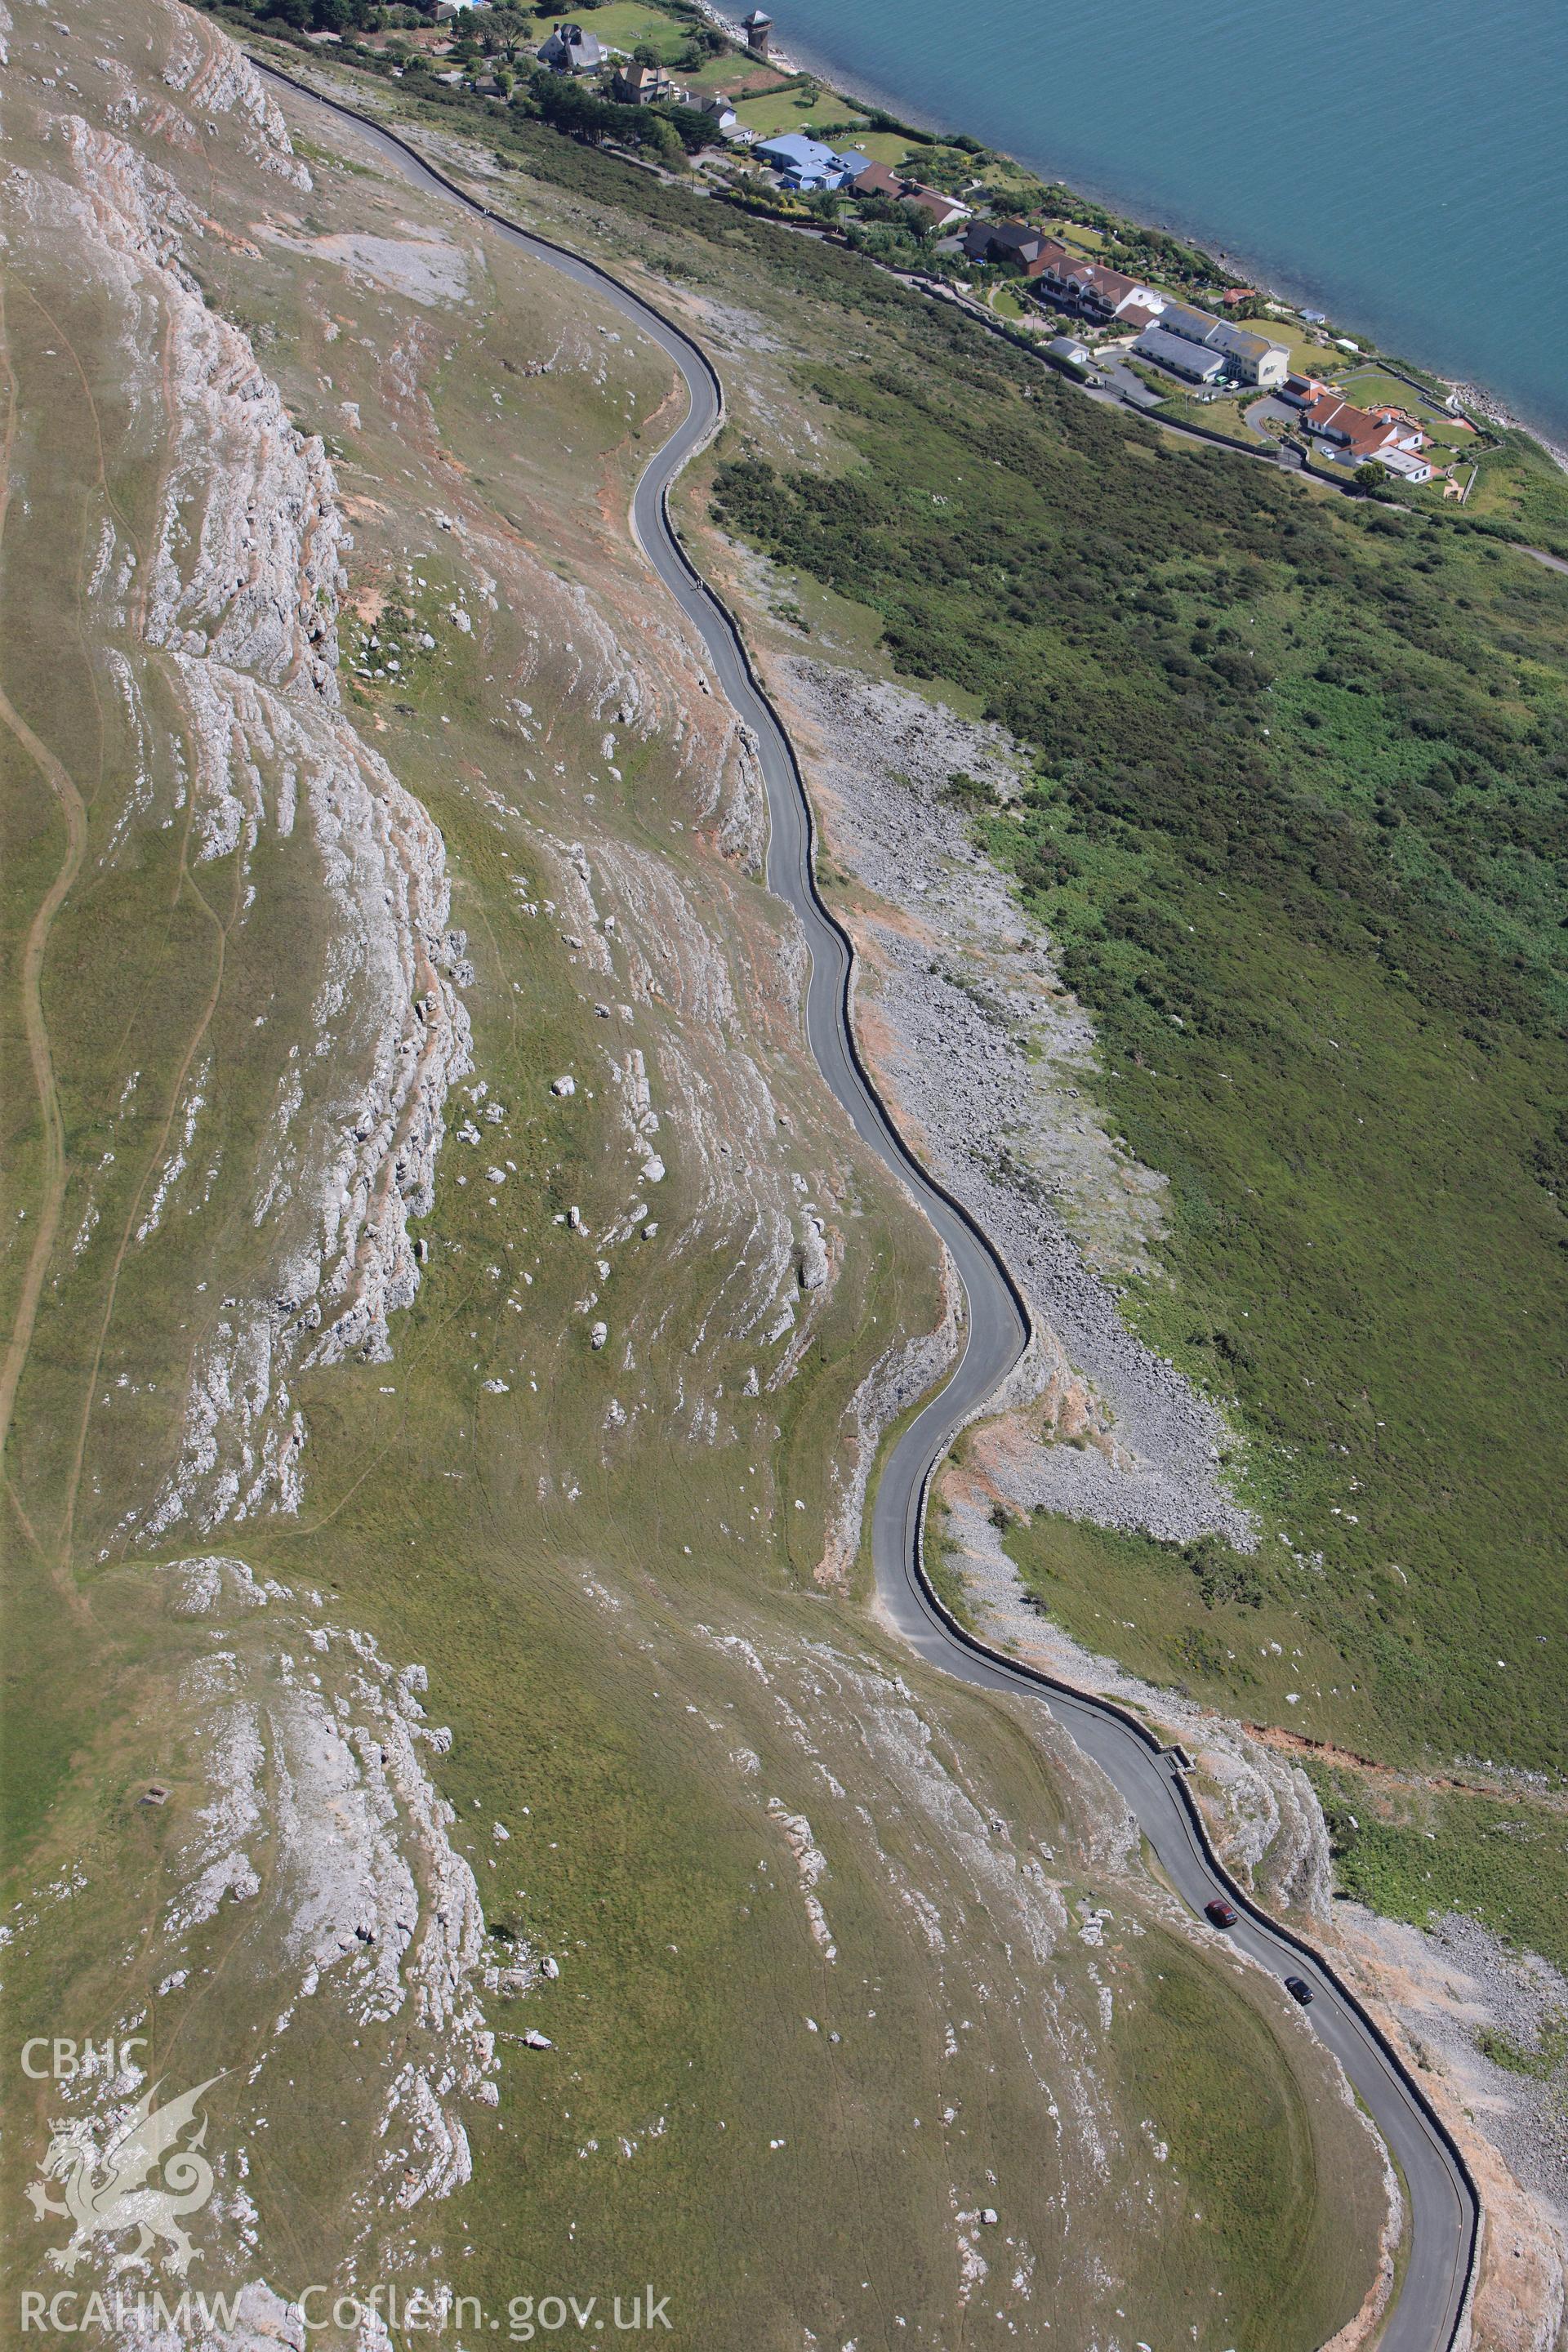 RCAHMW colour oblique photograph of Landscape, north-west part of Great Orme. Taken by Toby Driver on 20/07/2011.